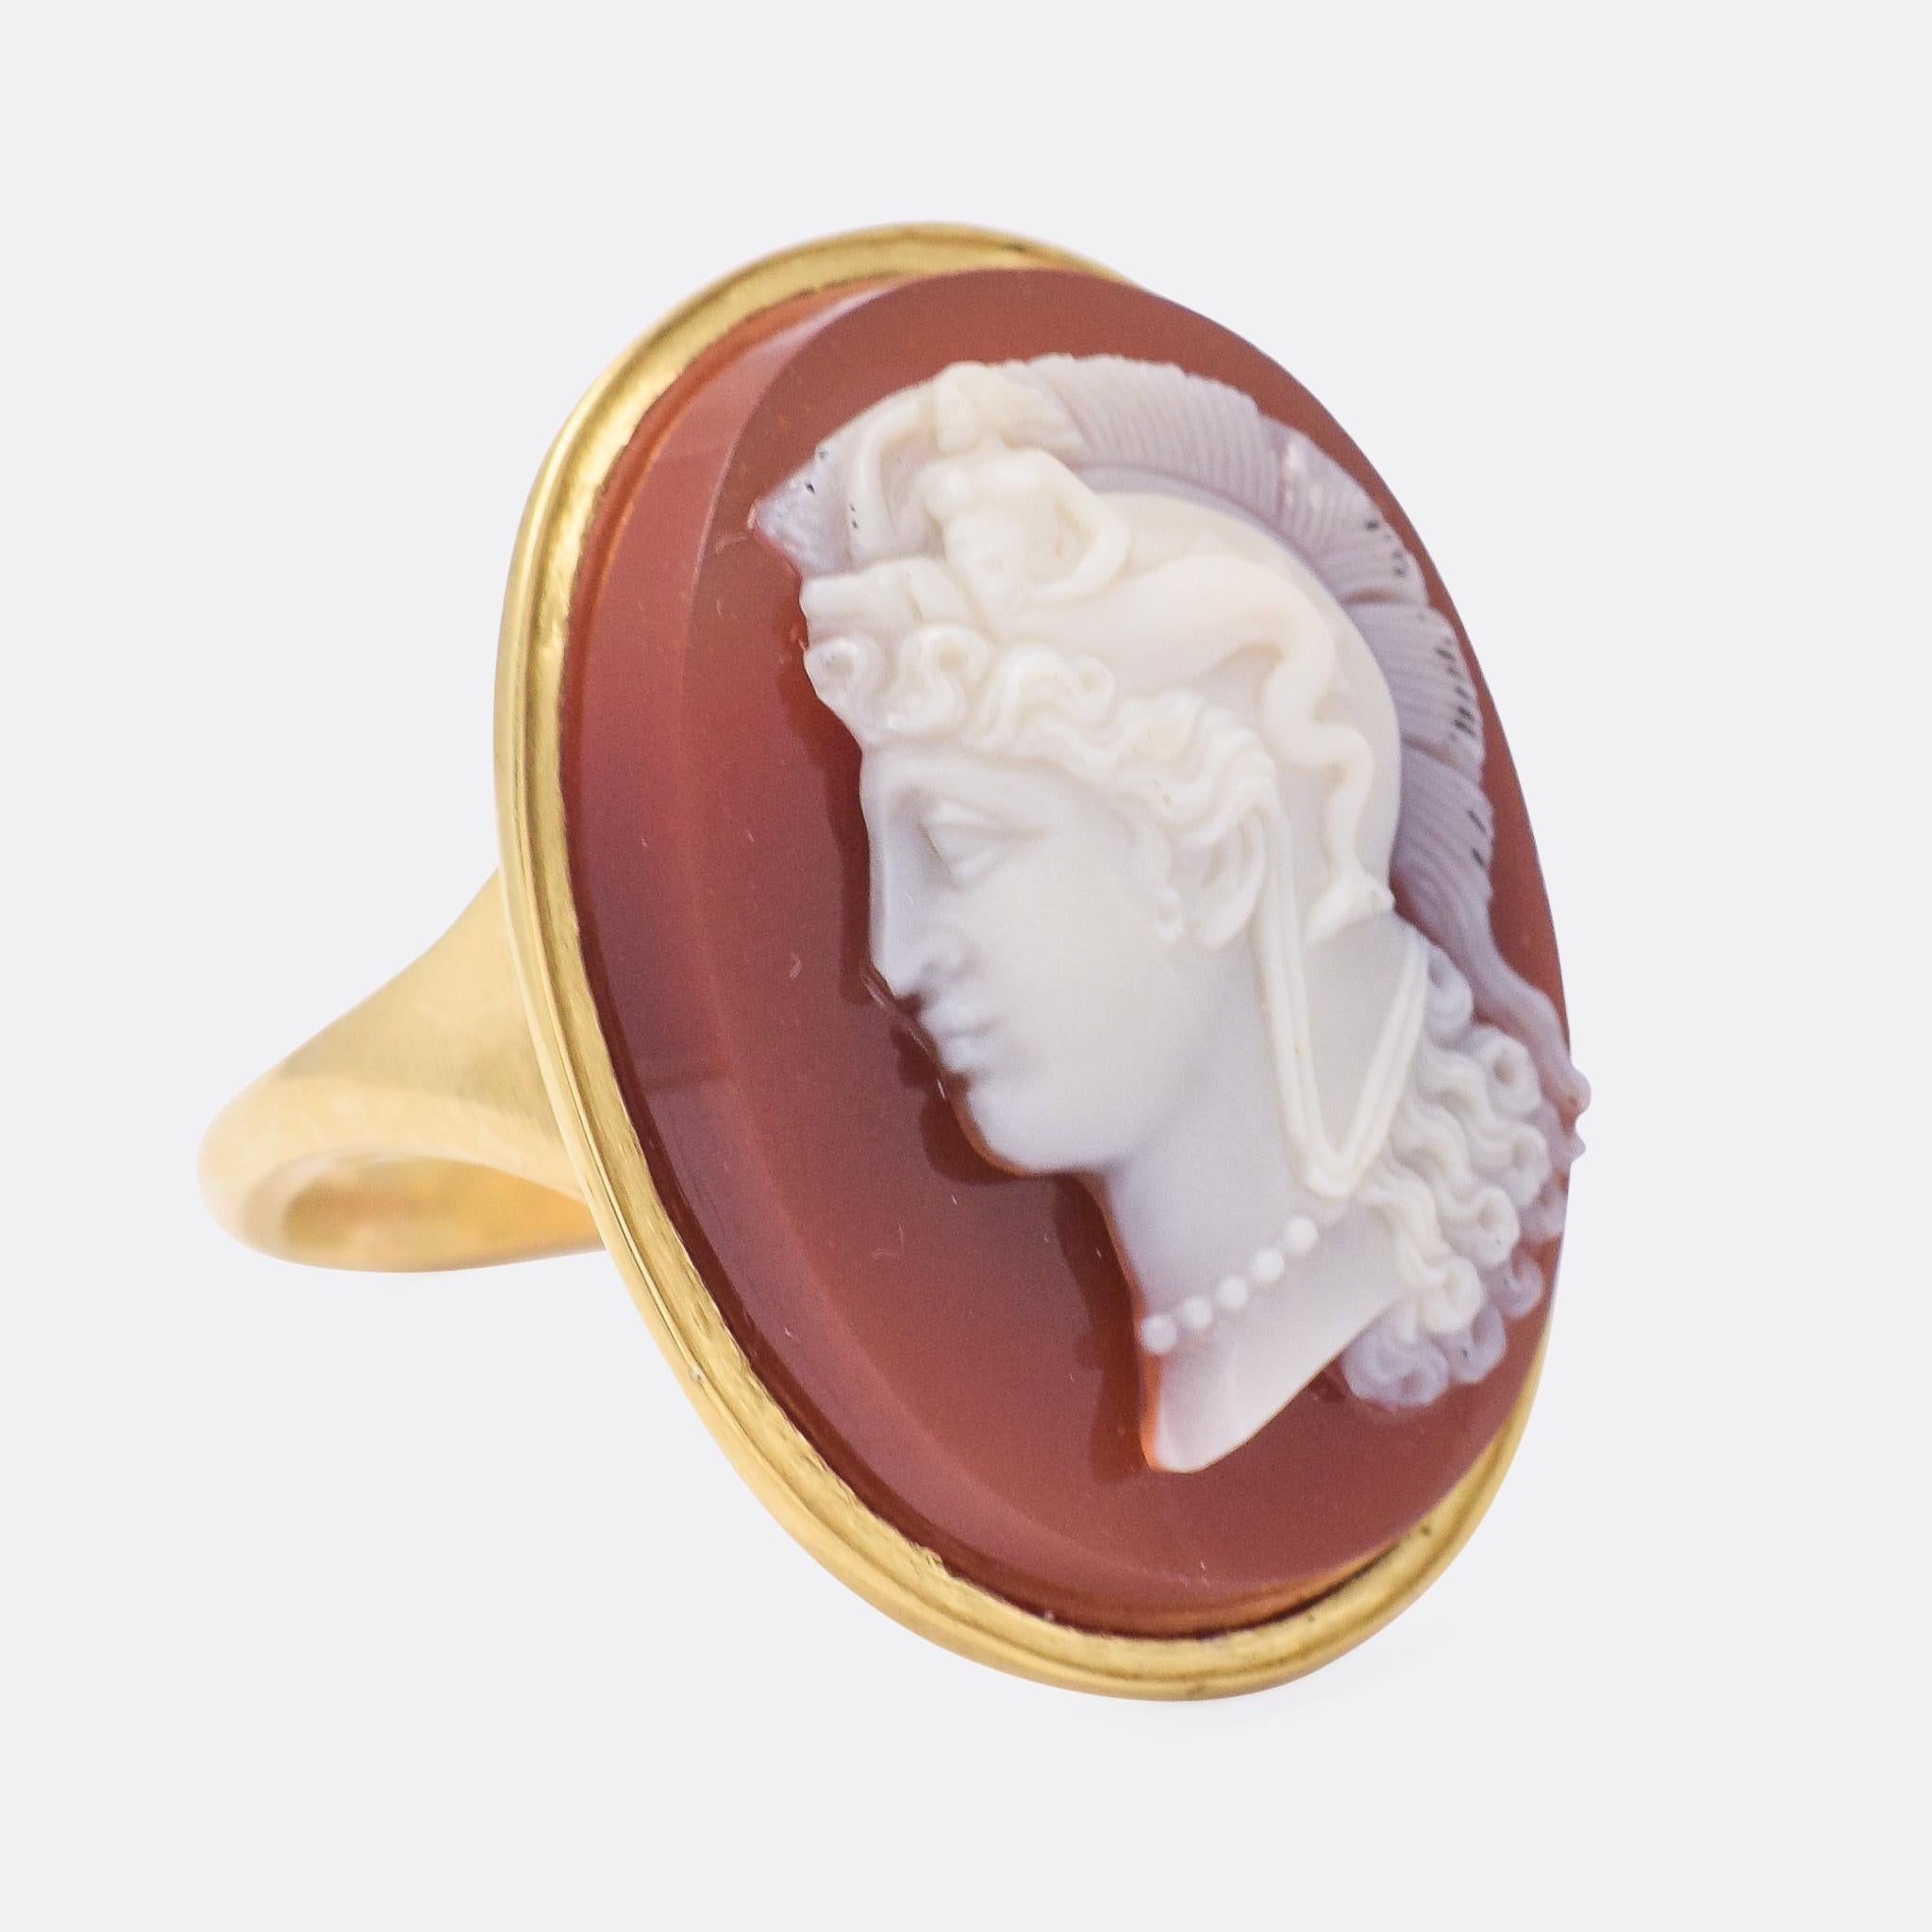 DESCRIPTION

Cameo: Georgian, c.1820

A stunning Georgian sardonyx cameo ring dating from the early 19th Century. We believe the figure depicted is Thessalonike of Macedon, daughter of King Philip II and half-sister of Alexander the Great. She wears